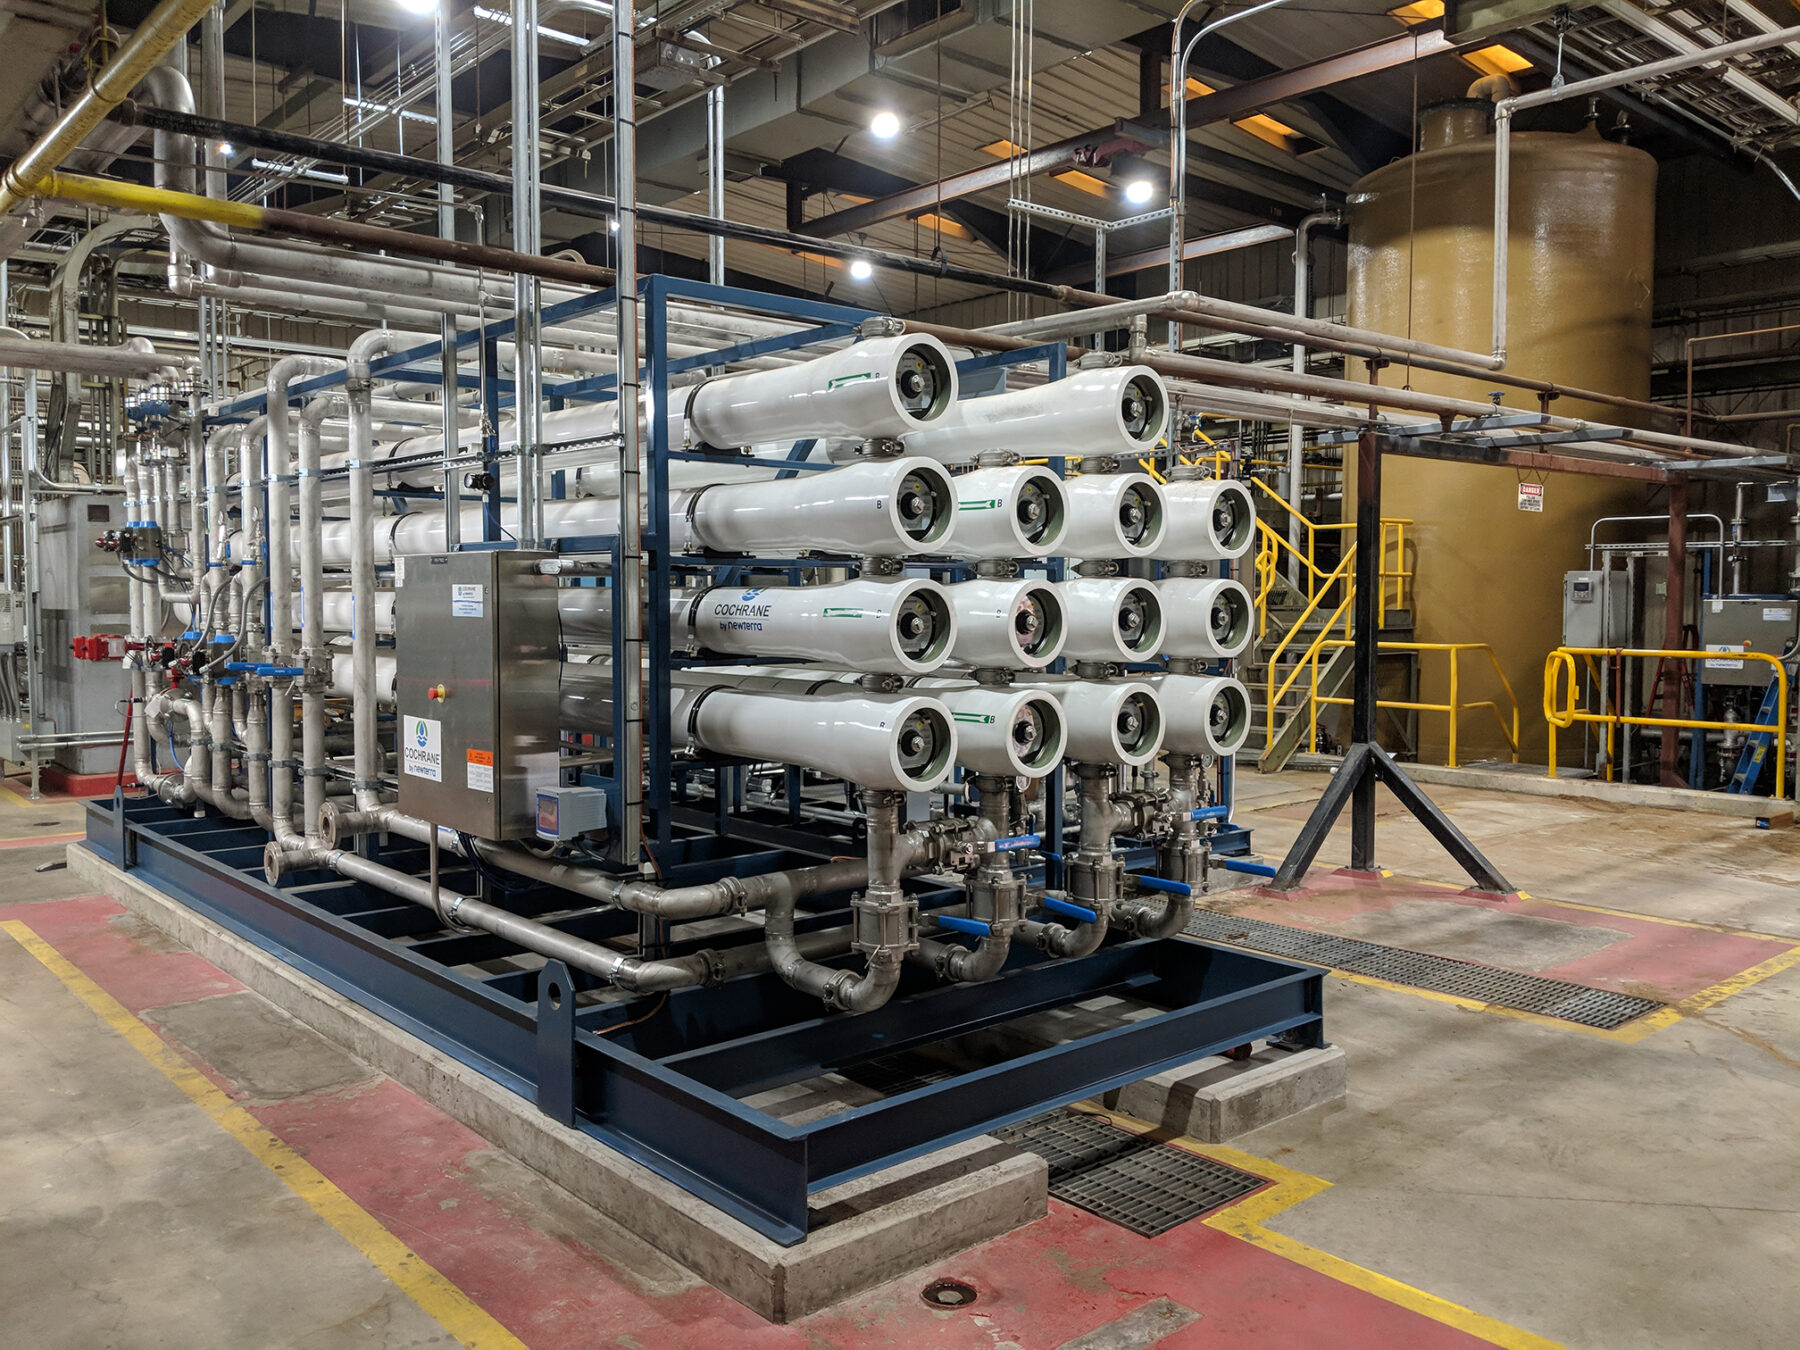 Newterra custom reverse osmosis system consists of a fourteen white pipes stacked in four columns consisting of four pipes, three pipes, four pipes, and three pipes when read left to right with a blue enameled steel frame with steel pipes leading to a control box within a water treatment warehouse.